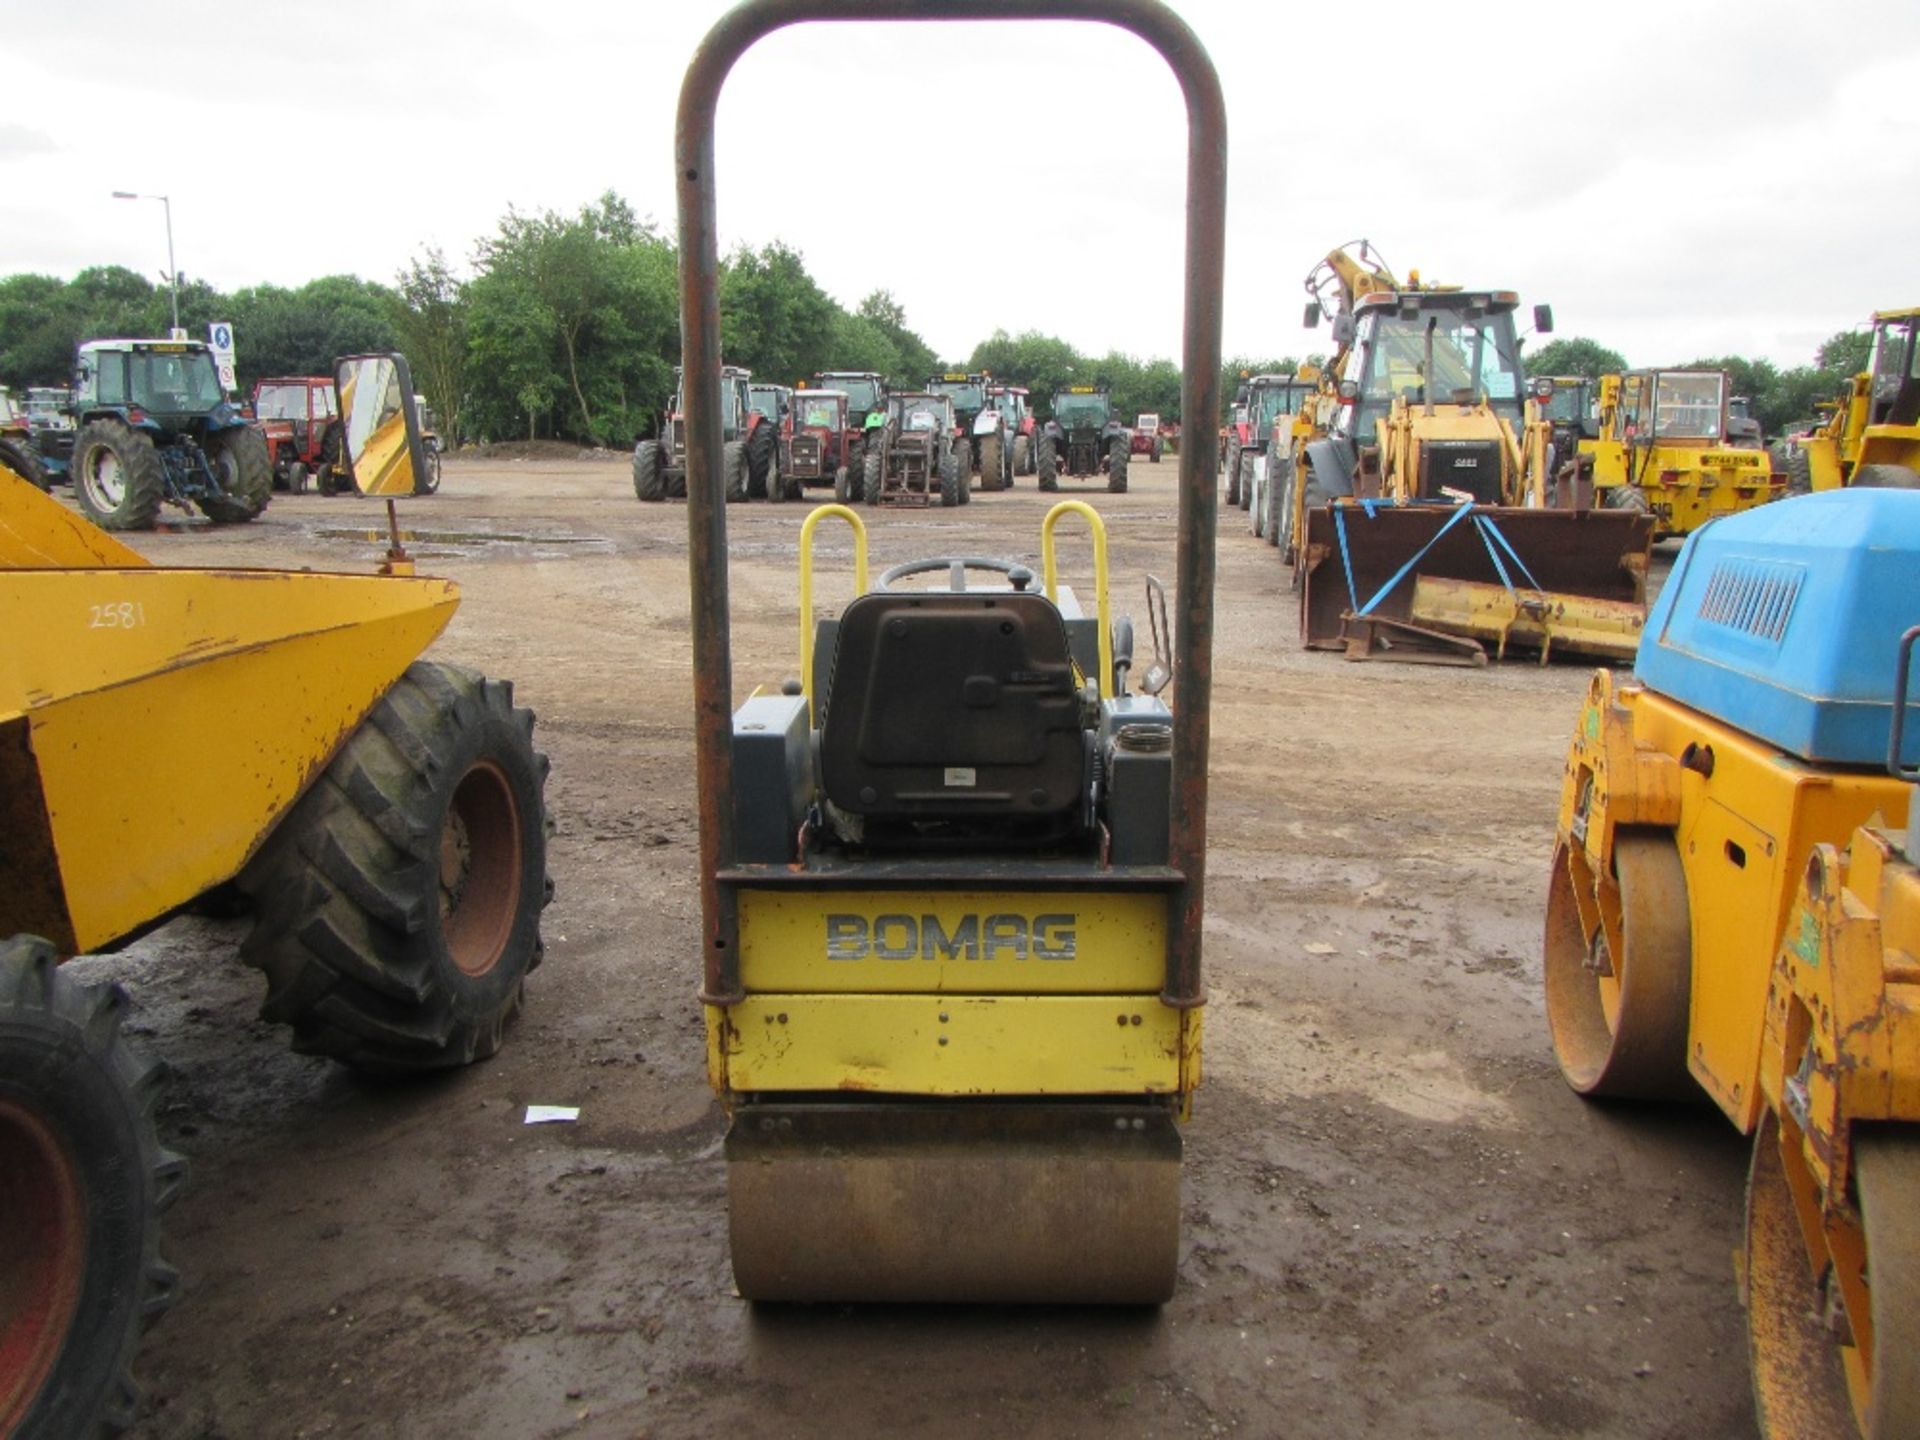 Bomag BW 80 AD Double Drum Ride on Vibrating Roller - Image 3 of 3